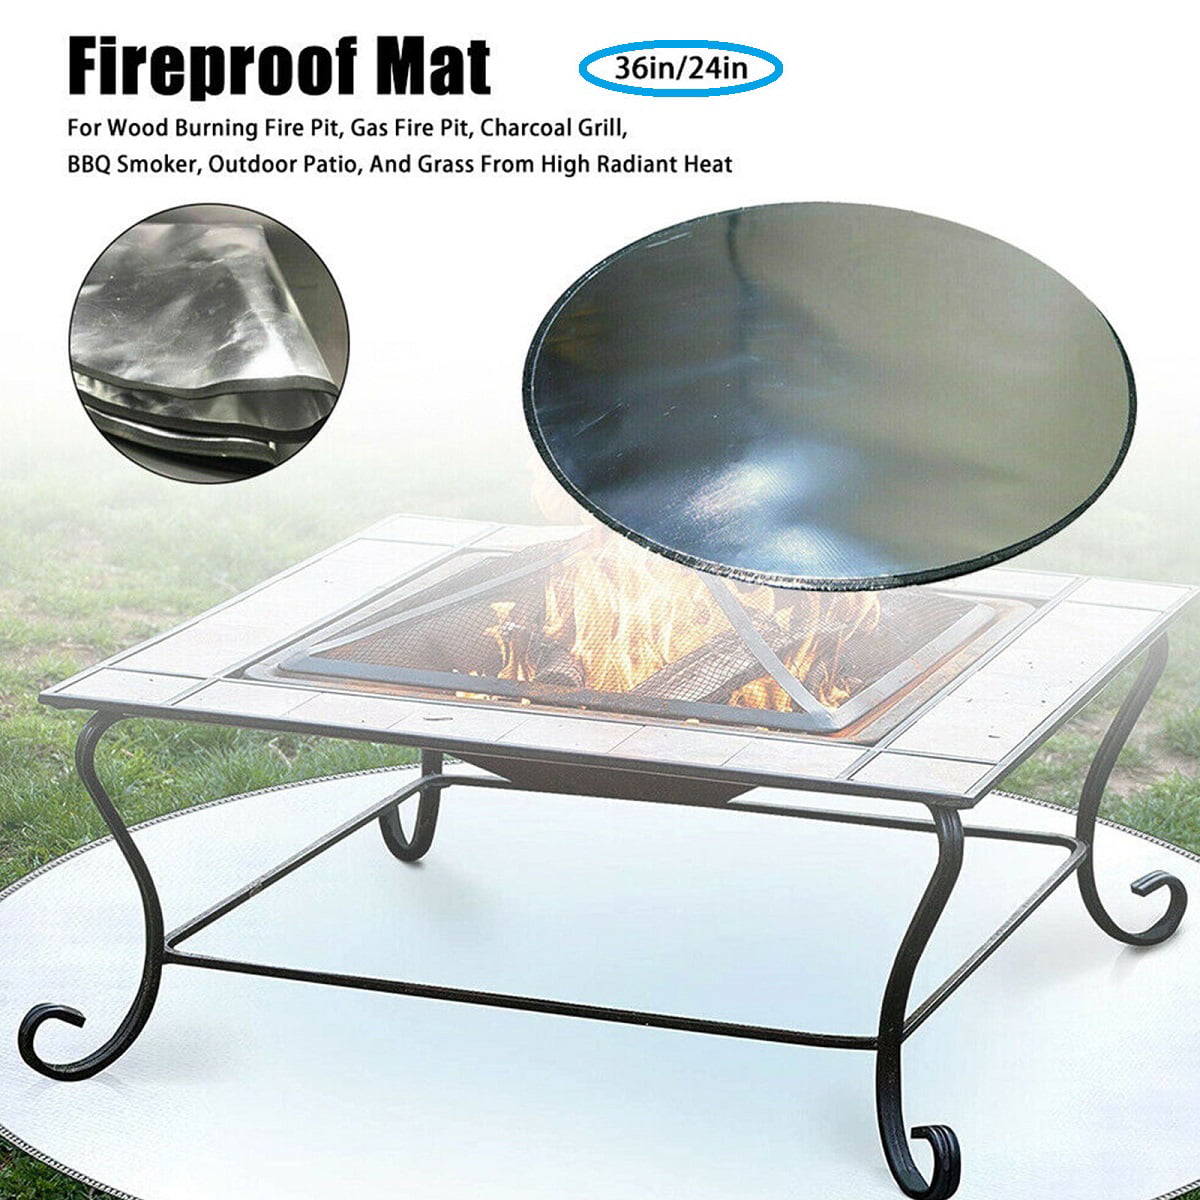 Portable Round Fire Pit Mat Grill, Fire Pit Floor Protector